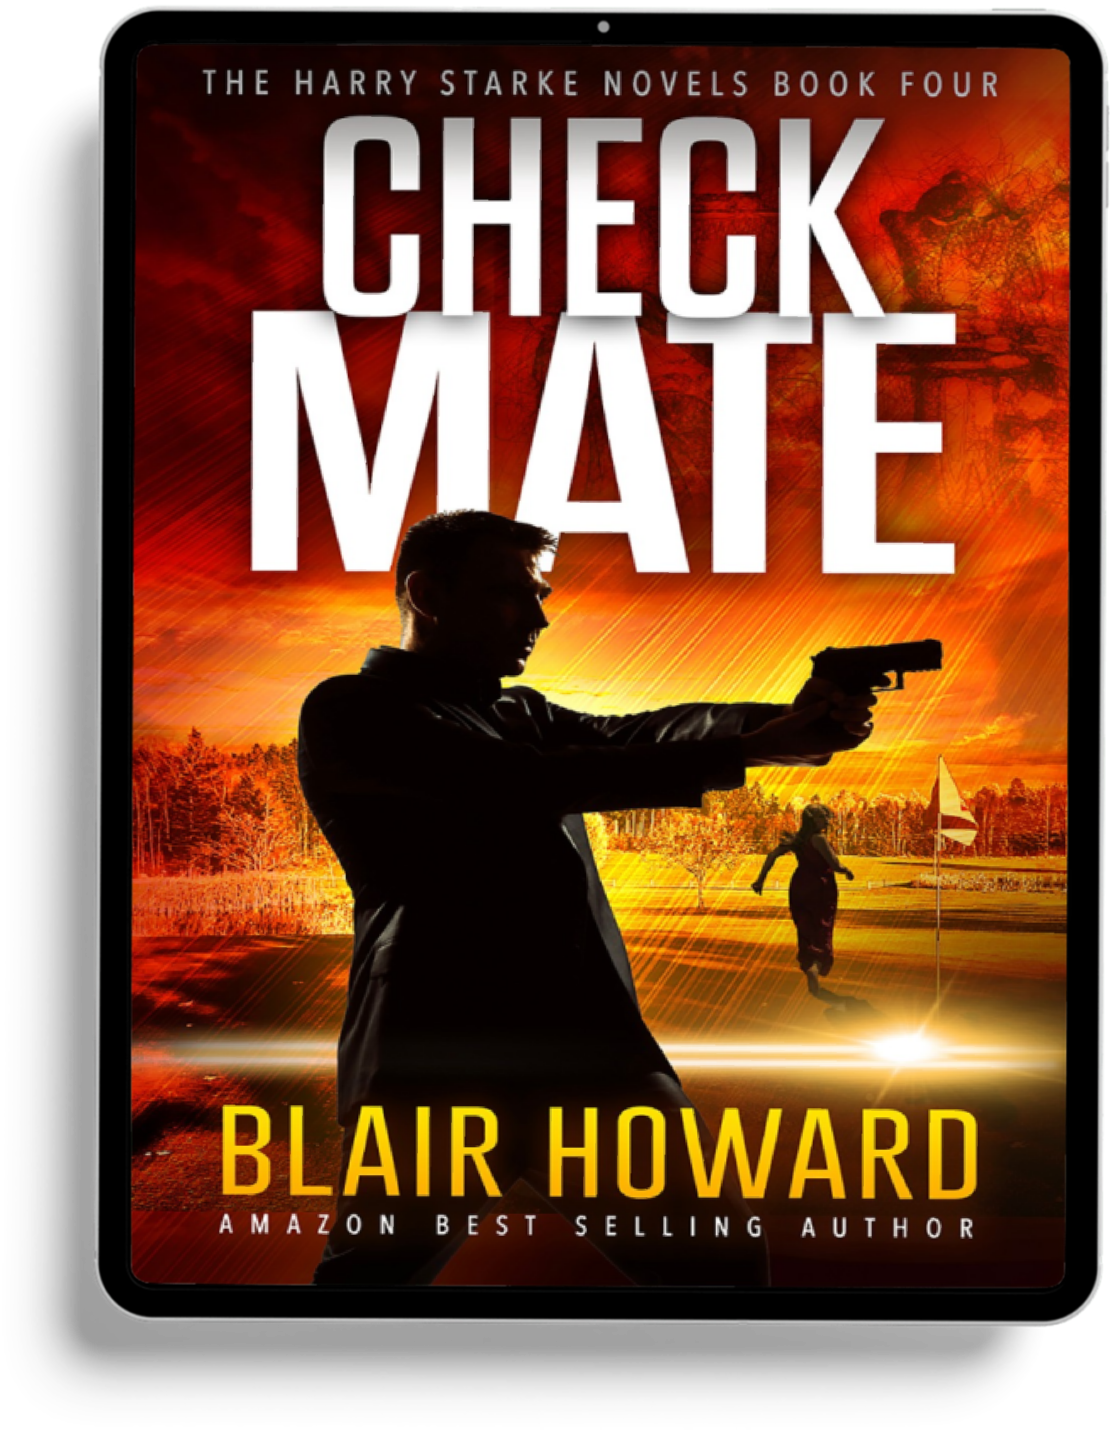 Checkmate (The Harry Starke Novels Book 4)